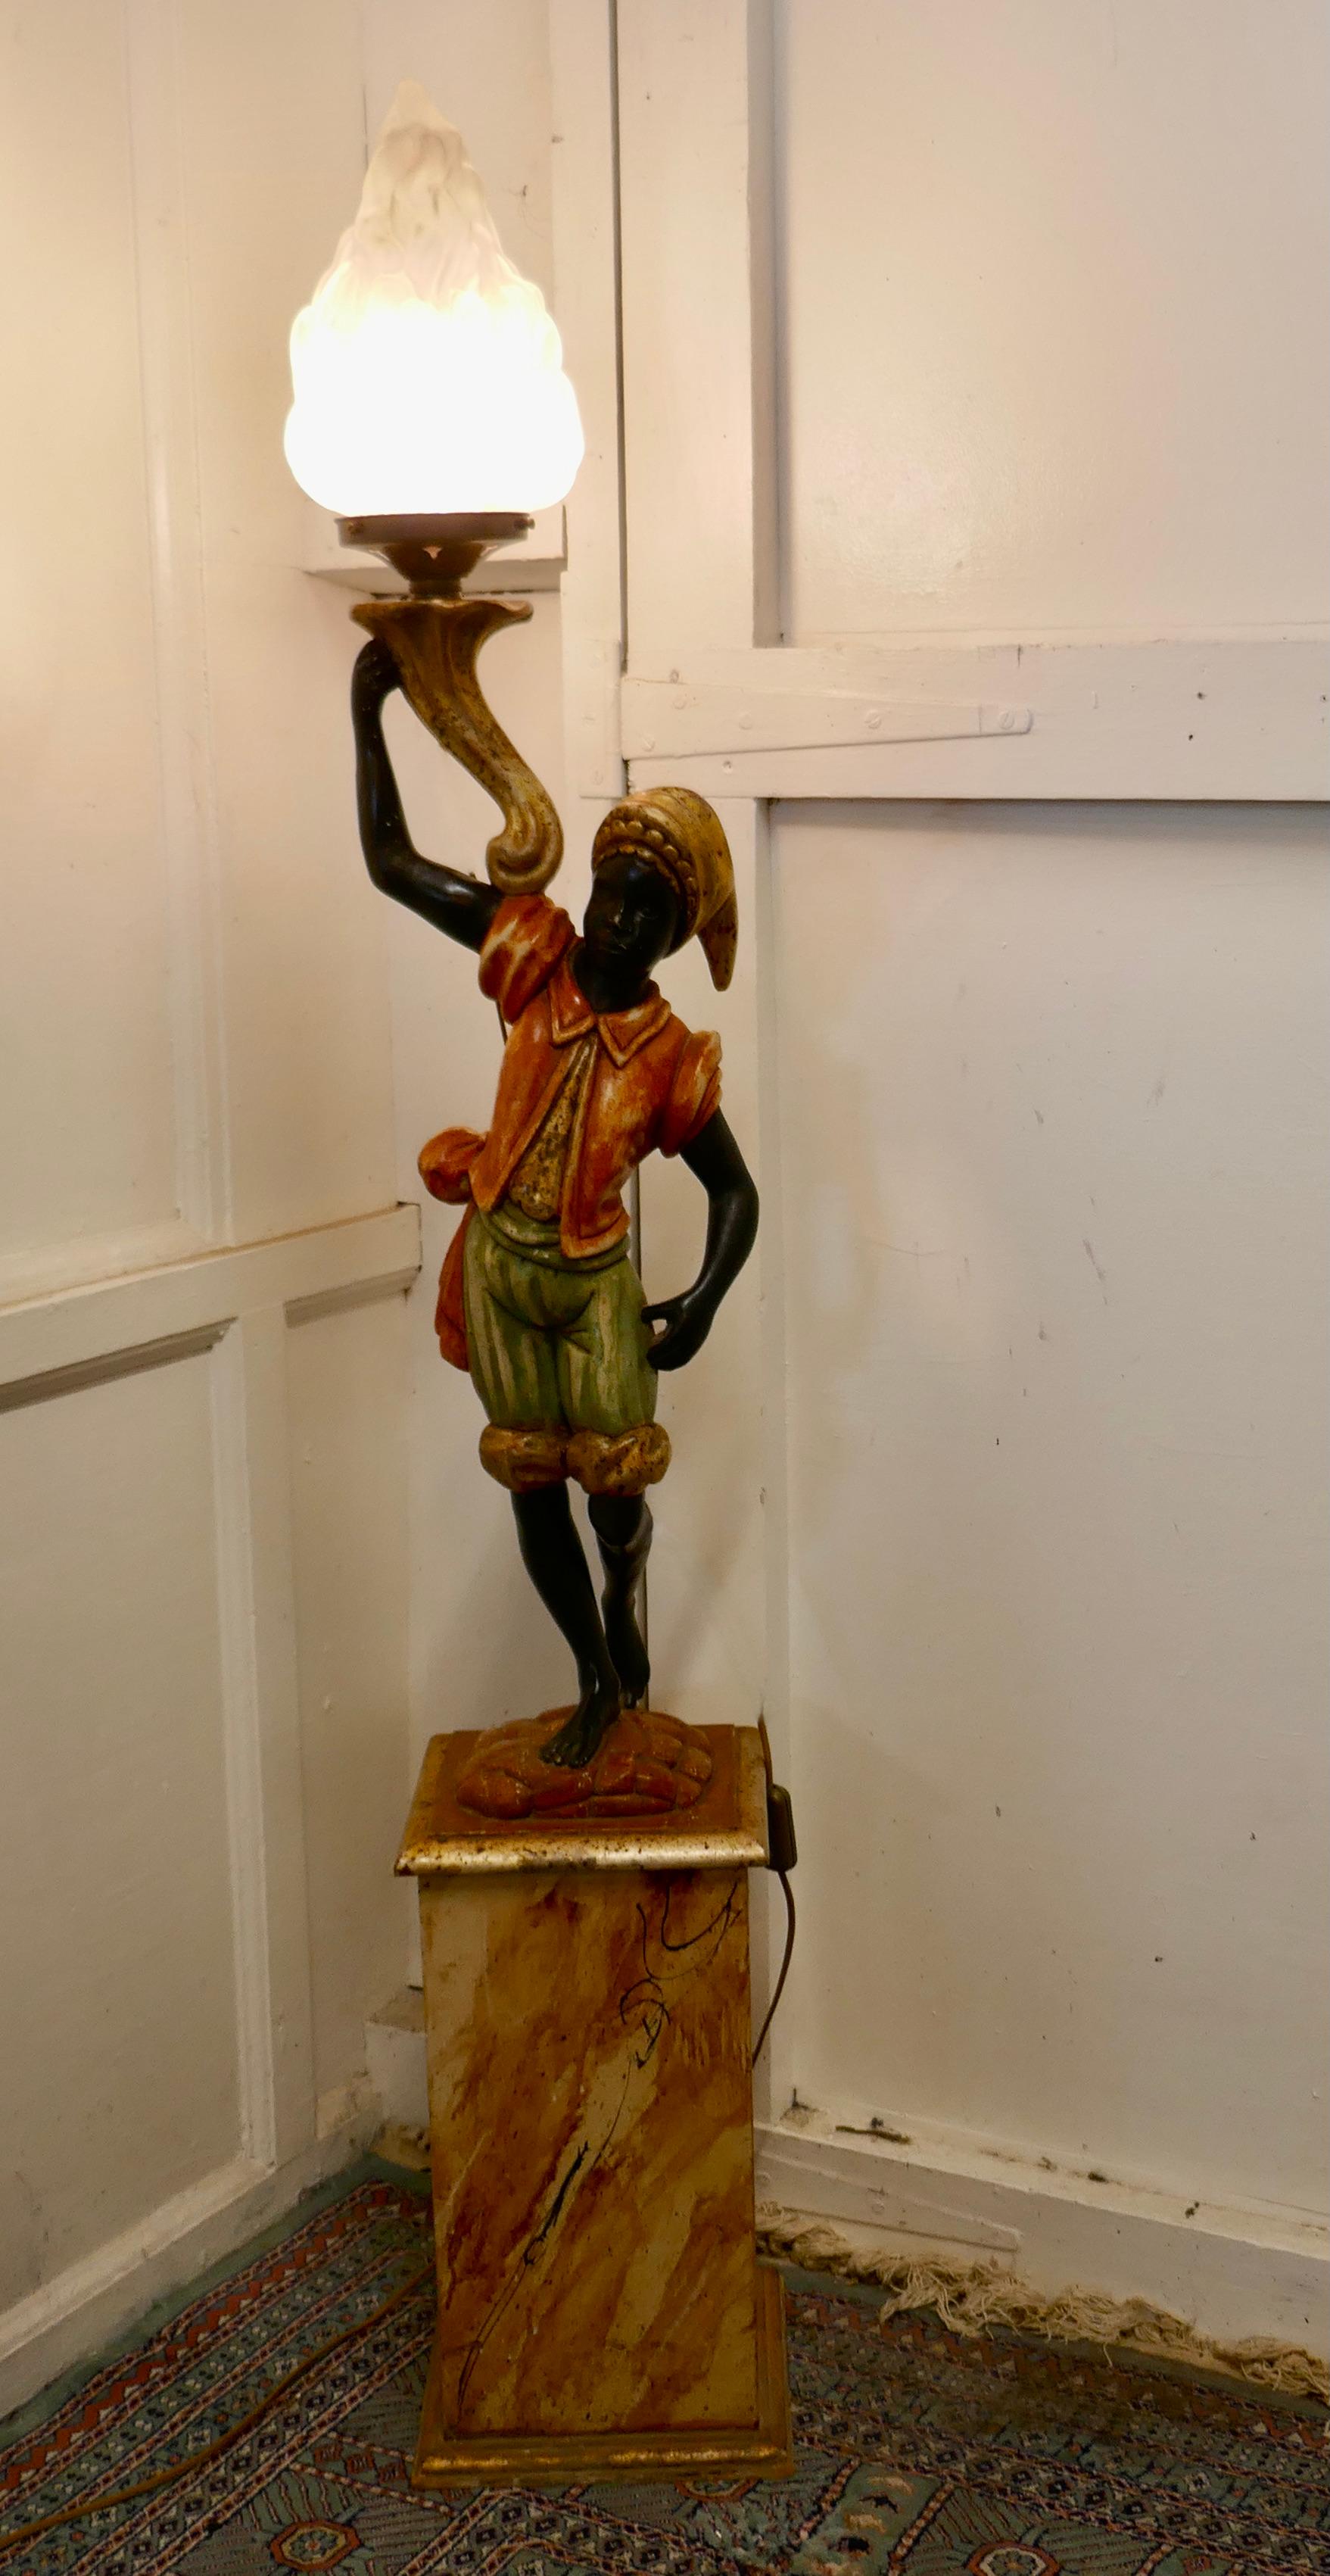 A magnificent venetian figural floor lamp

A charming Italian carved wooden figural floor lamp
The figure is carved in soft wood which has been prepared with gesso before being painted, the colours are good if a little worn by the years, he is